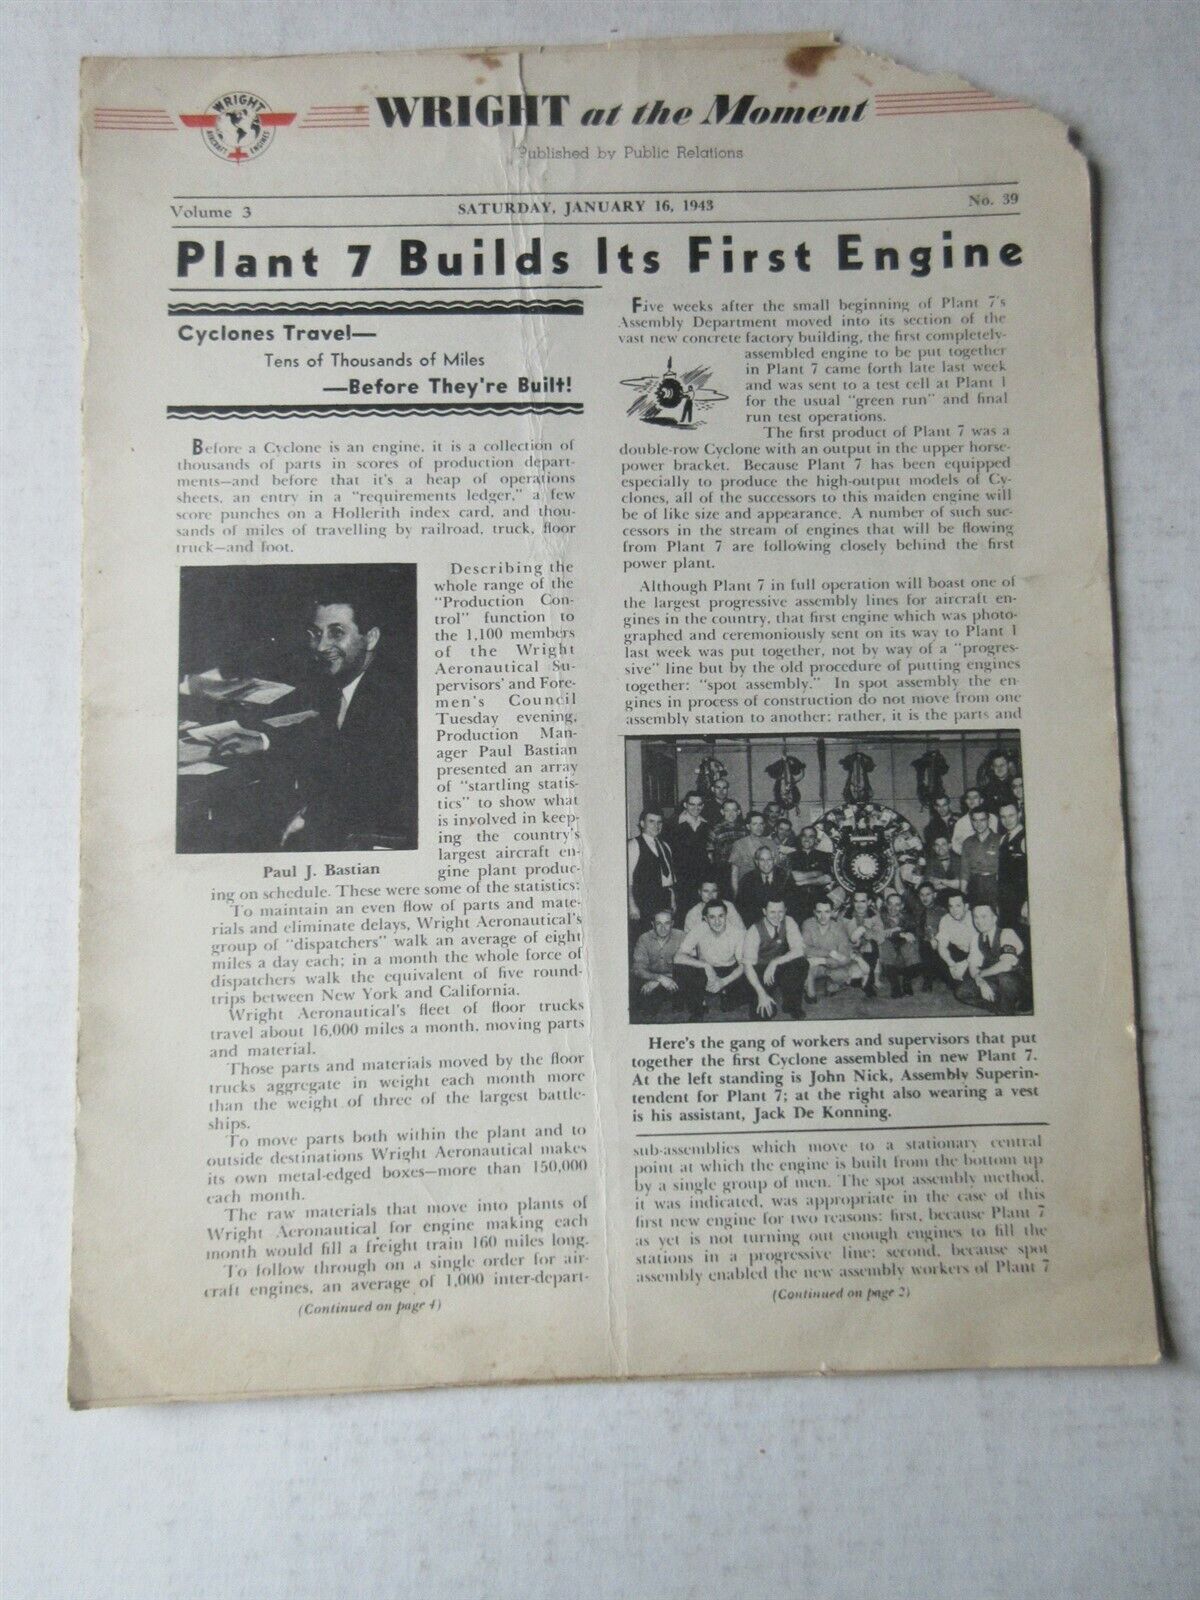 Wright at the Moment Curtiss-Wright newsletter January 16, 1943 Plant 7 Cyclone